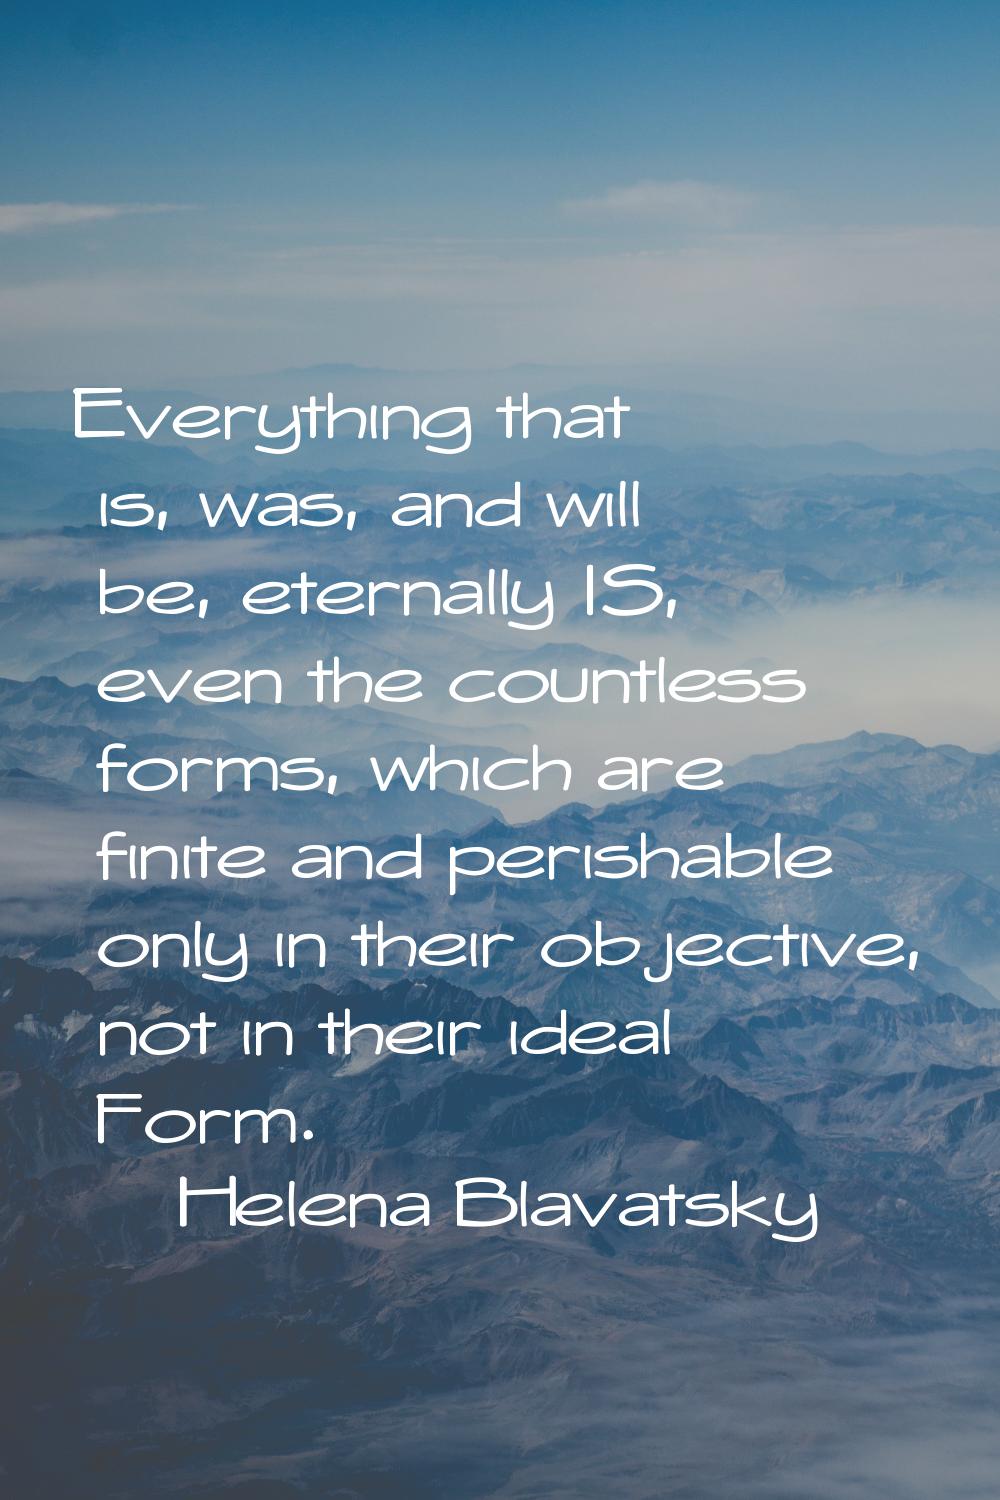 Everything that is, was, and will be, eternally IS, even the countless forms, which are finite and 